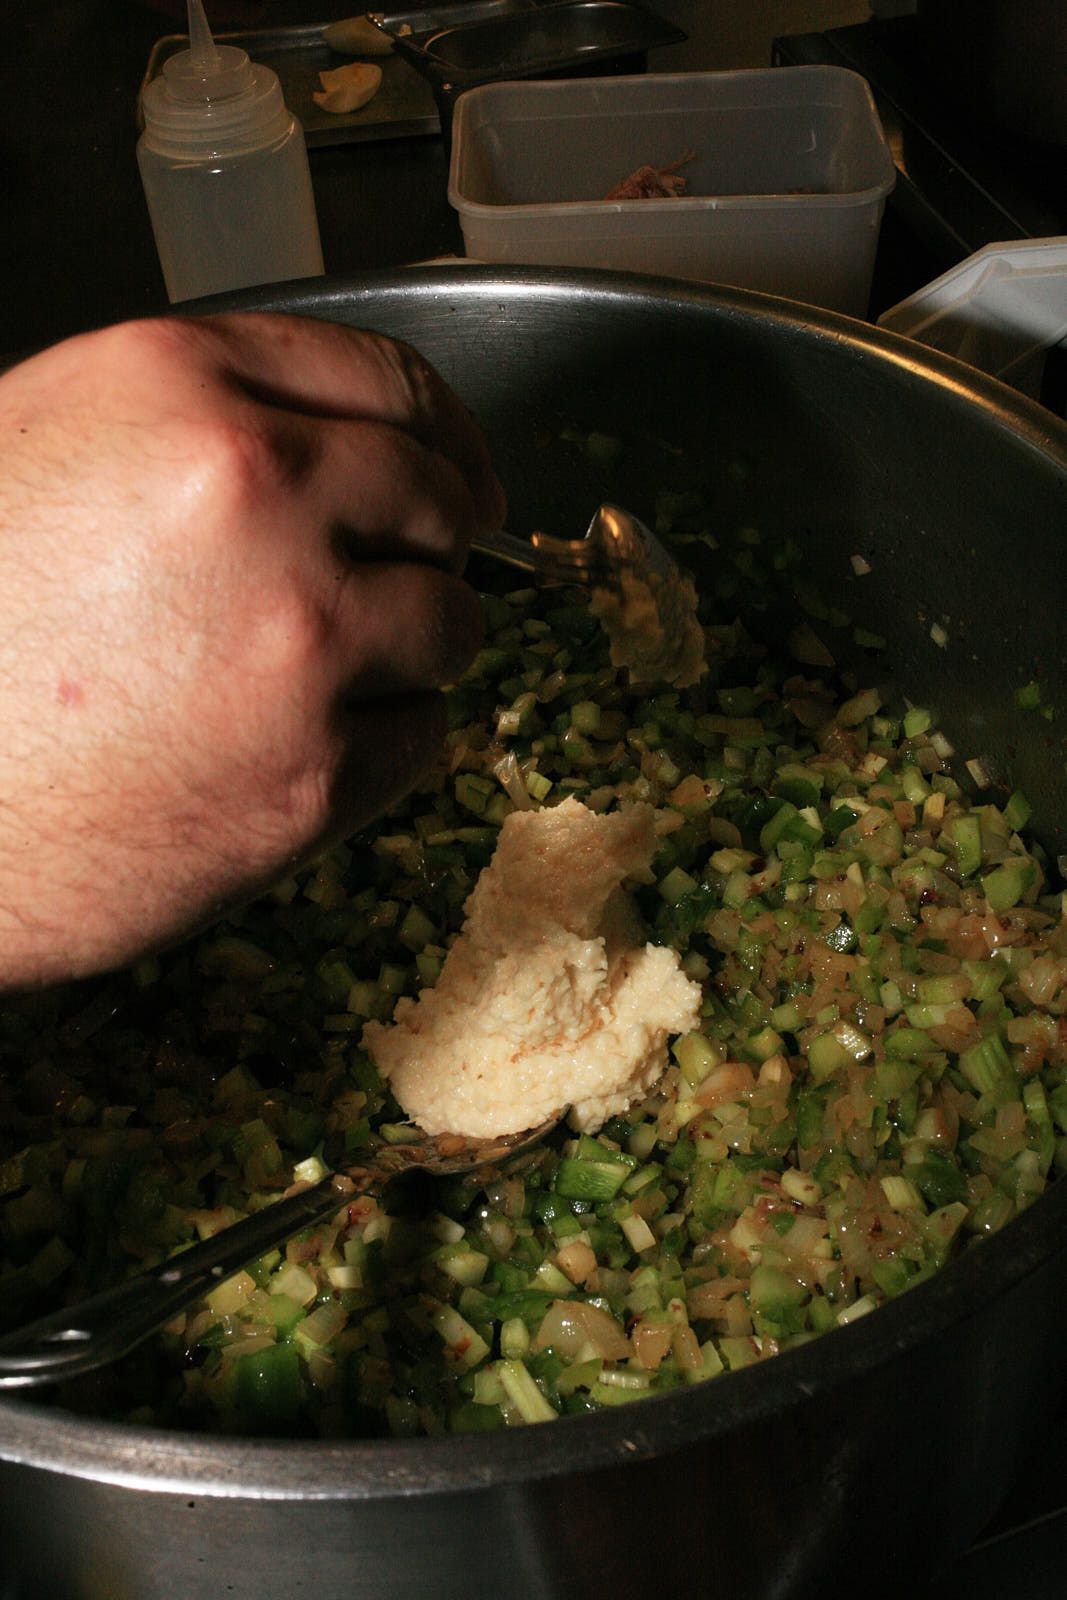 A chef spoons a beige, grated garlic paste into the peppers, celery, and onions, which are now sweated down in the steel pan.